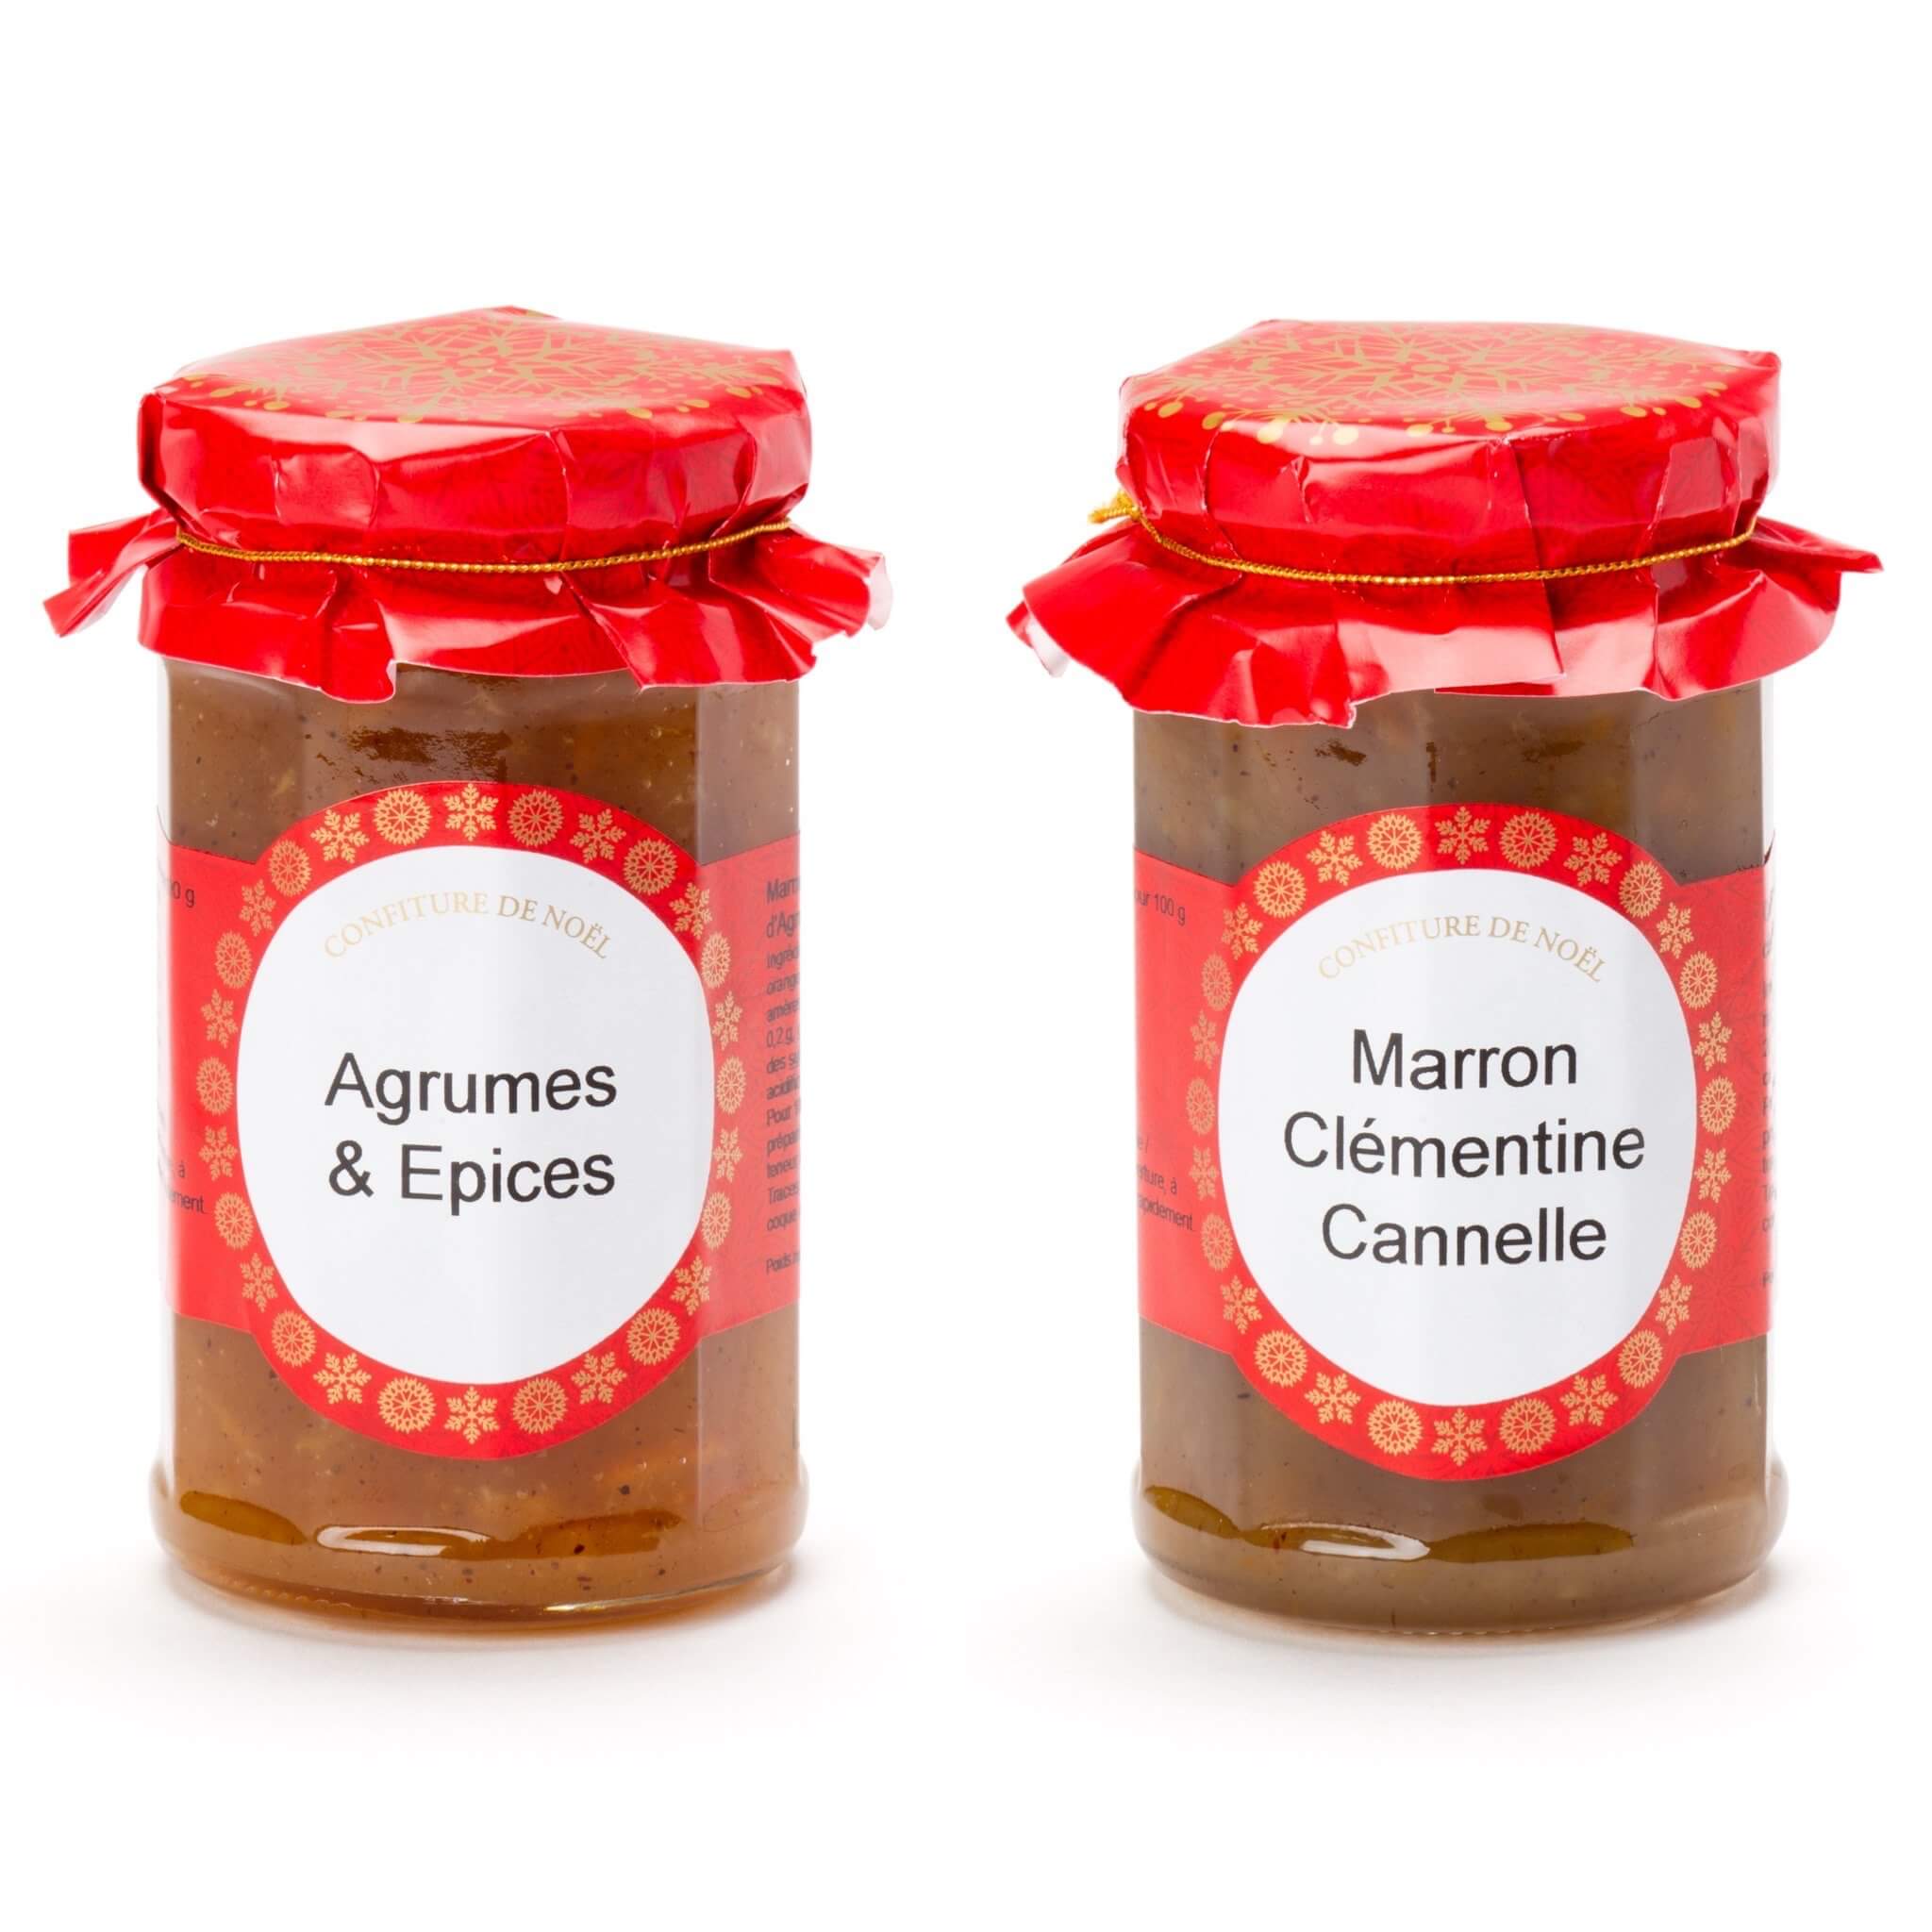 Christmas marmalade and jam by Andresy Confitures